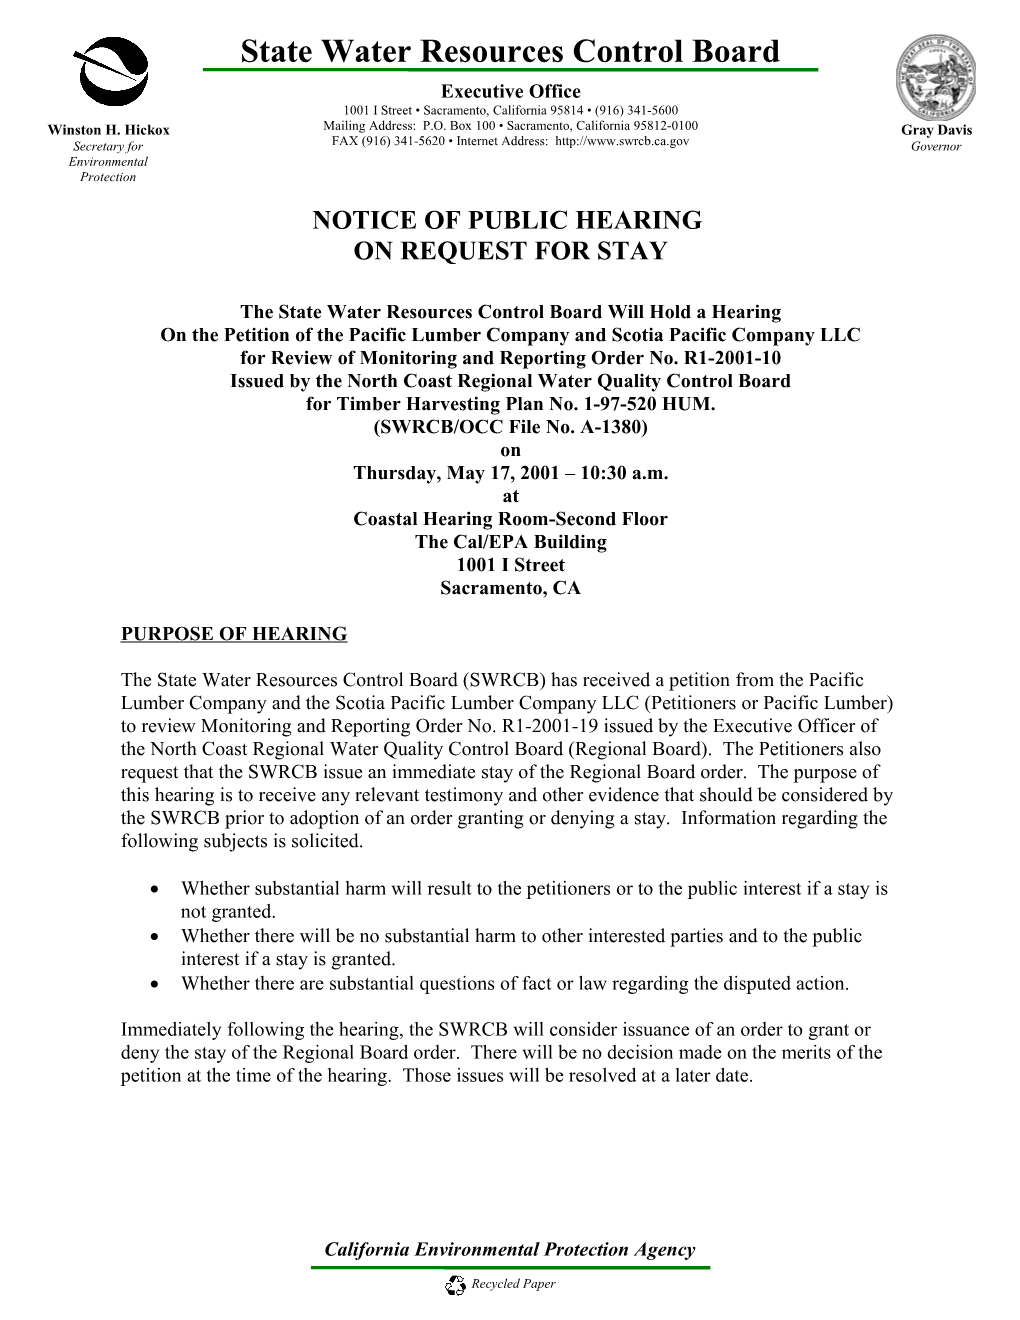 Hearing Notice/Pacific Lumber Co Re Stay Order